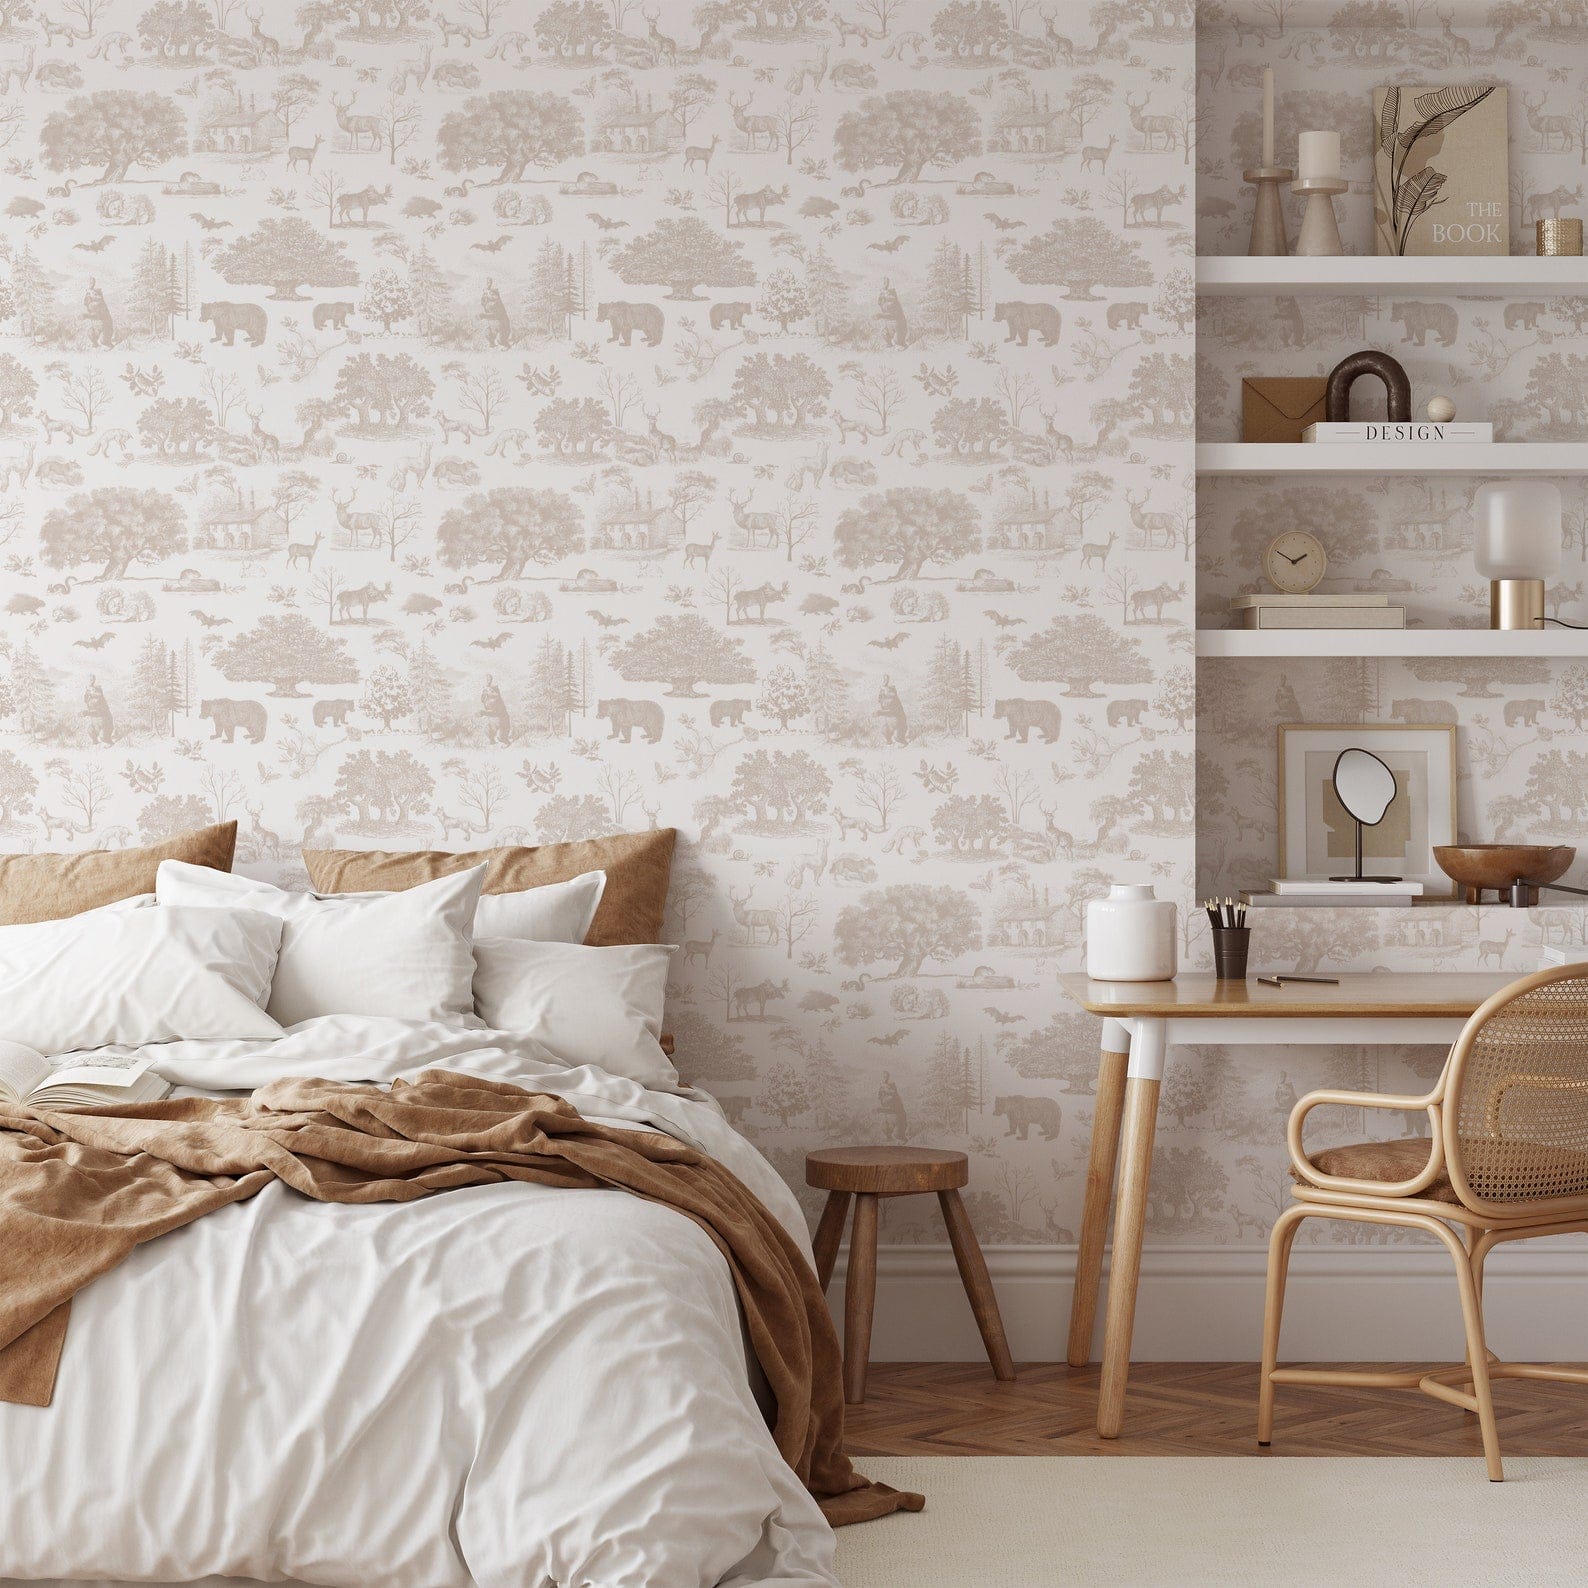 A cozy bedroom with neutral tones featuring Vintage Neutral Toile Wildlife Wallpaper. The wallpaper showcases detailed wildlife scenes with bears, deer, and trees in a soft beige color on a white background, creating a tranquil and classic ambiance.